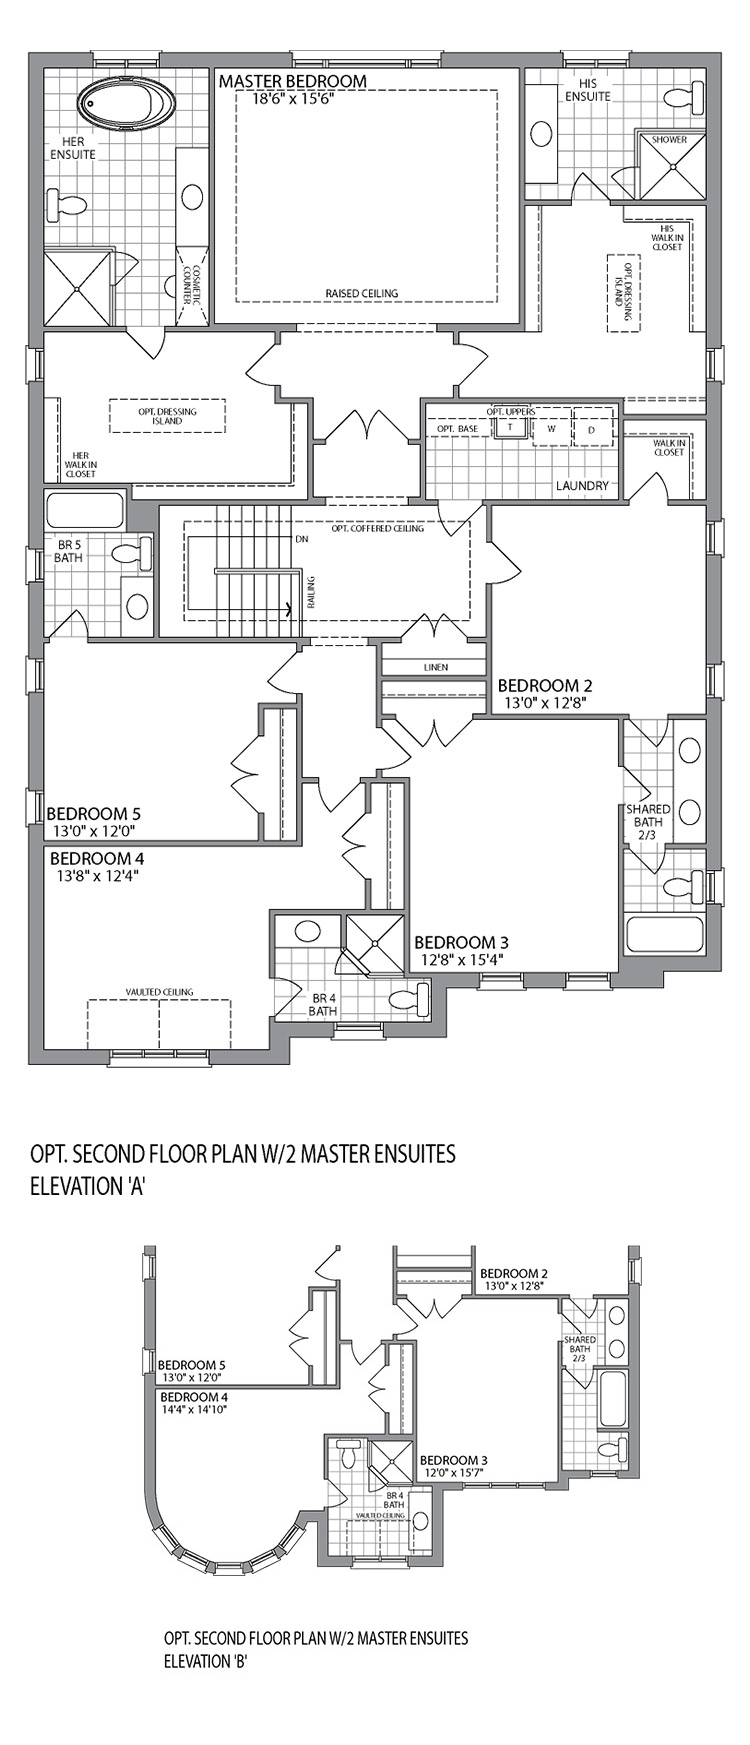 Optional Second Floor with 2 master ensuites Elevation A & B